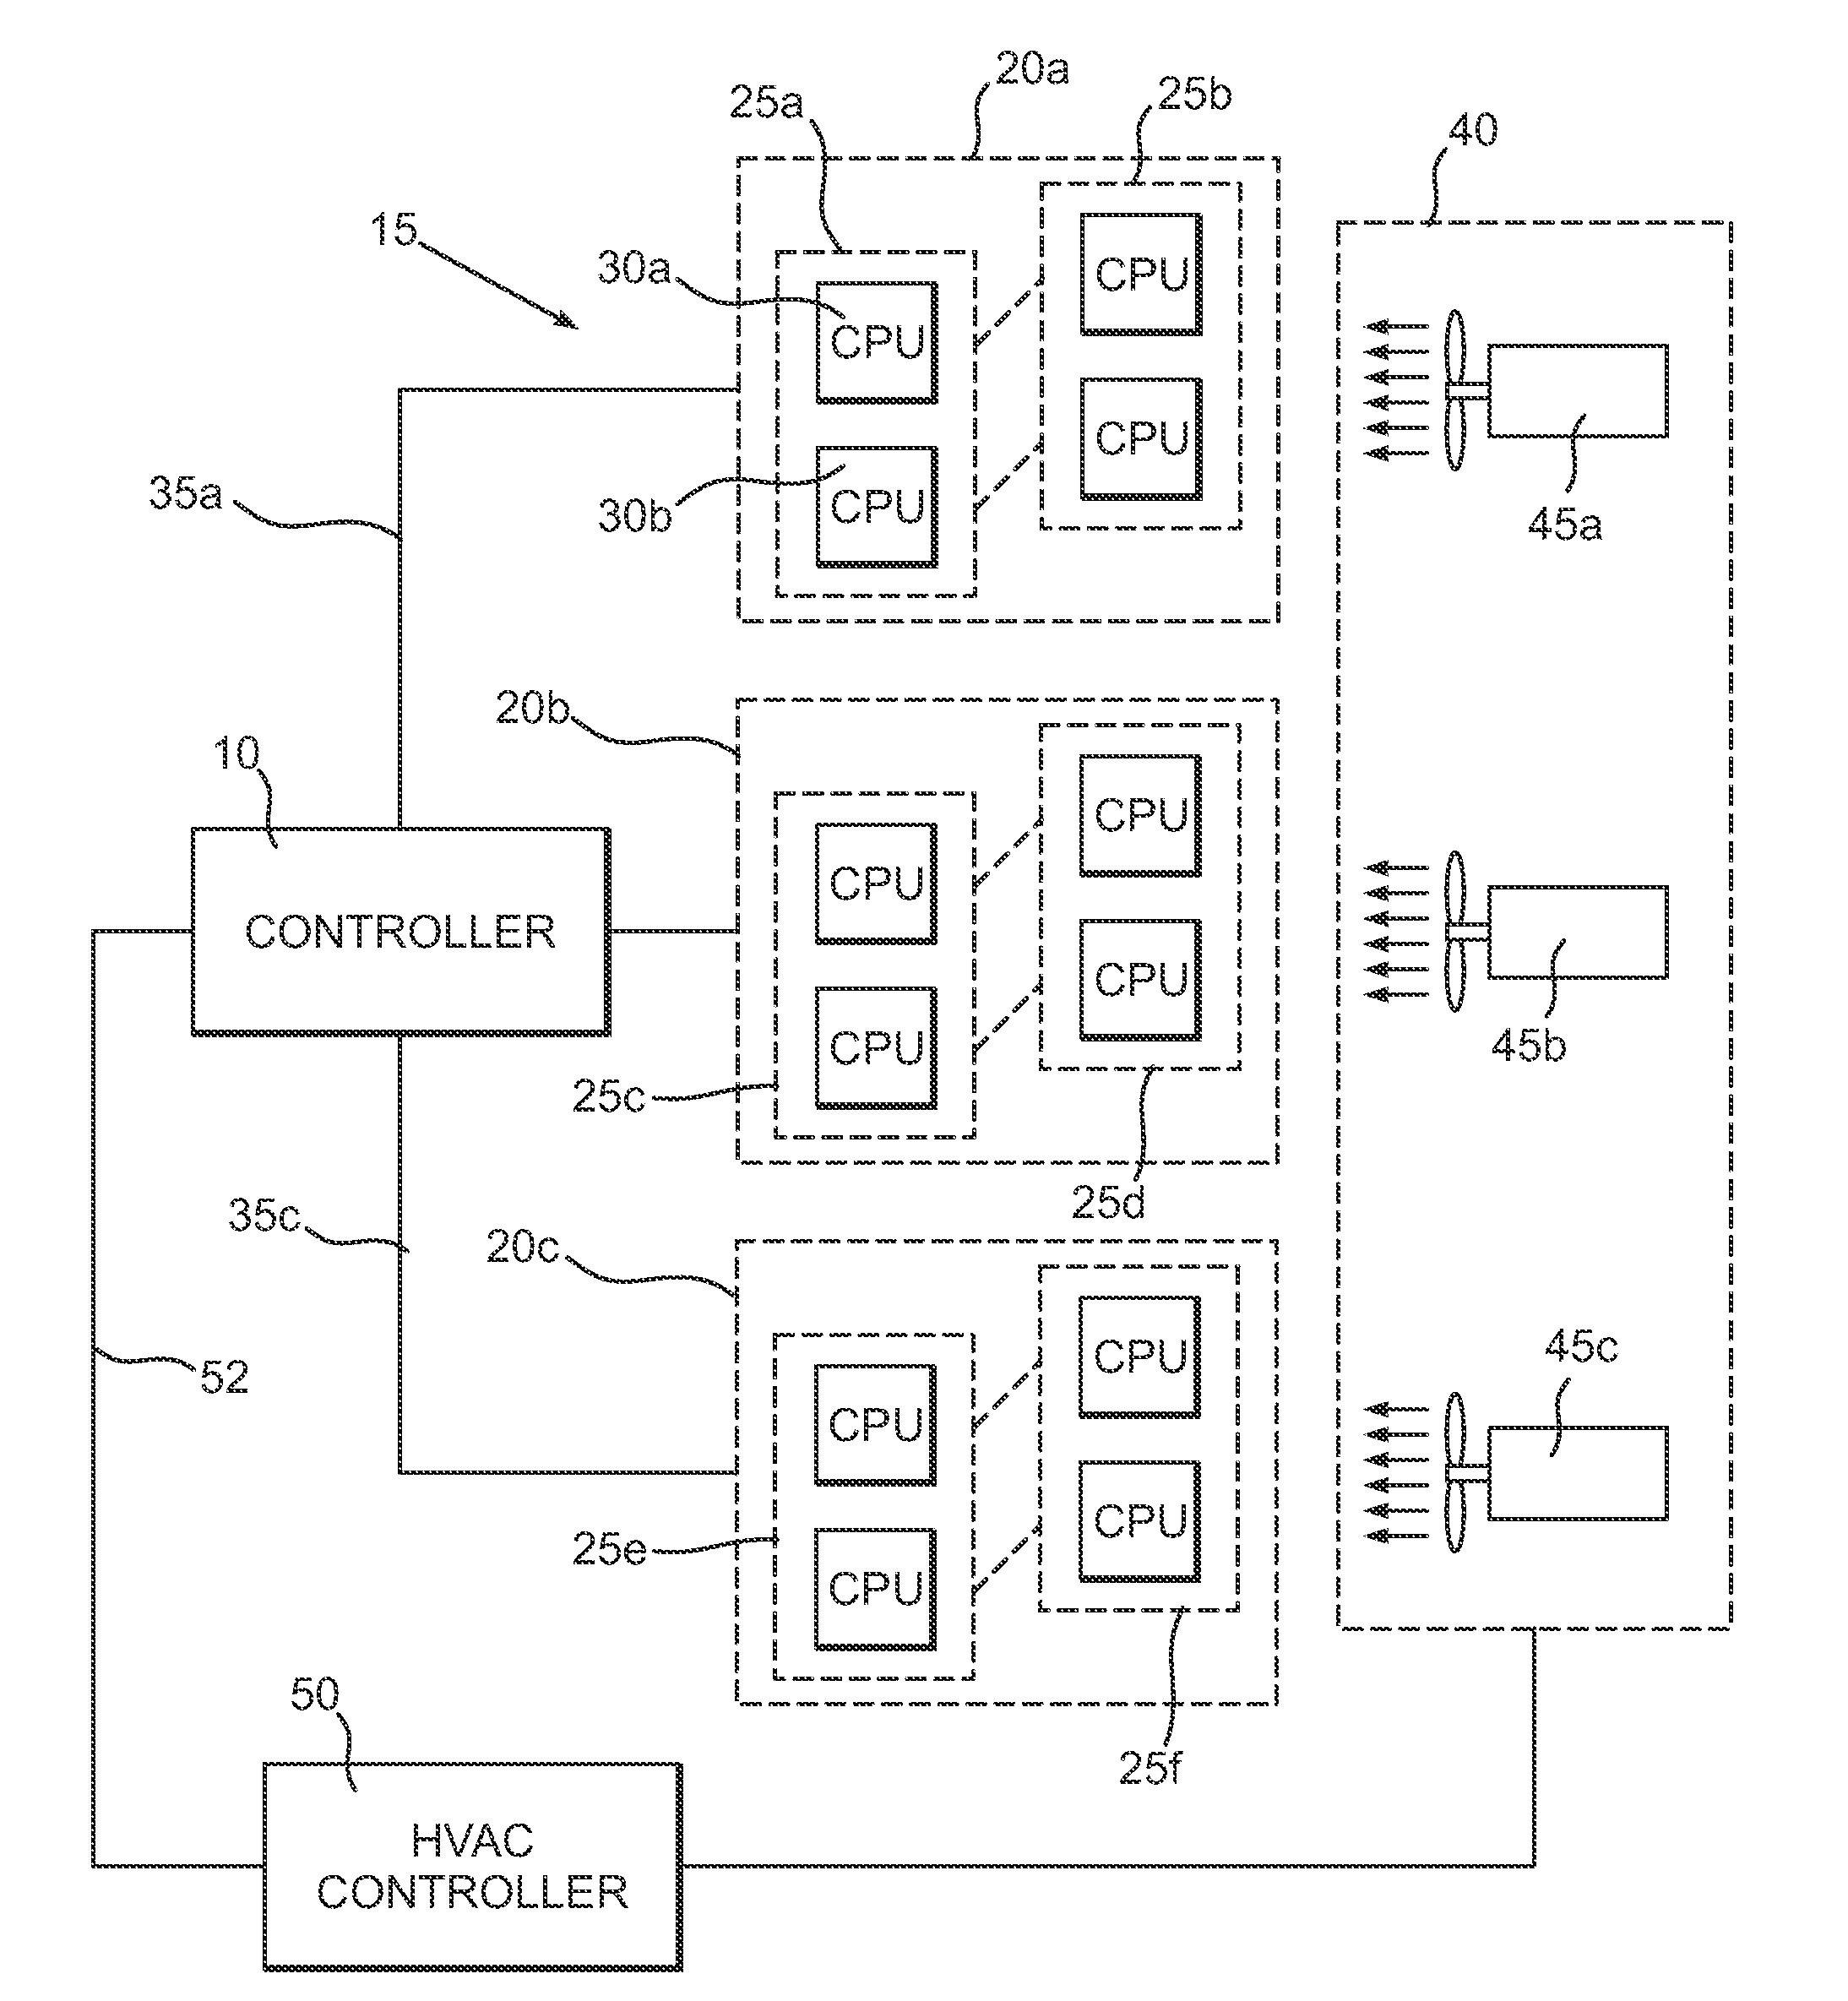 Computing center power and cooling control apparatus and method